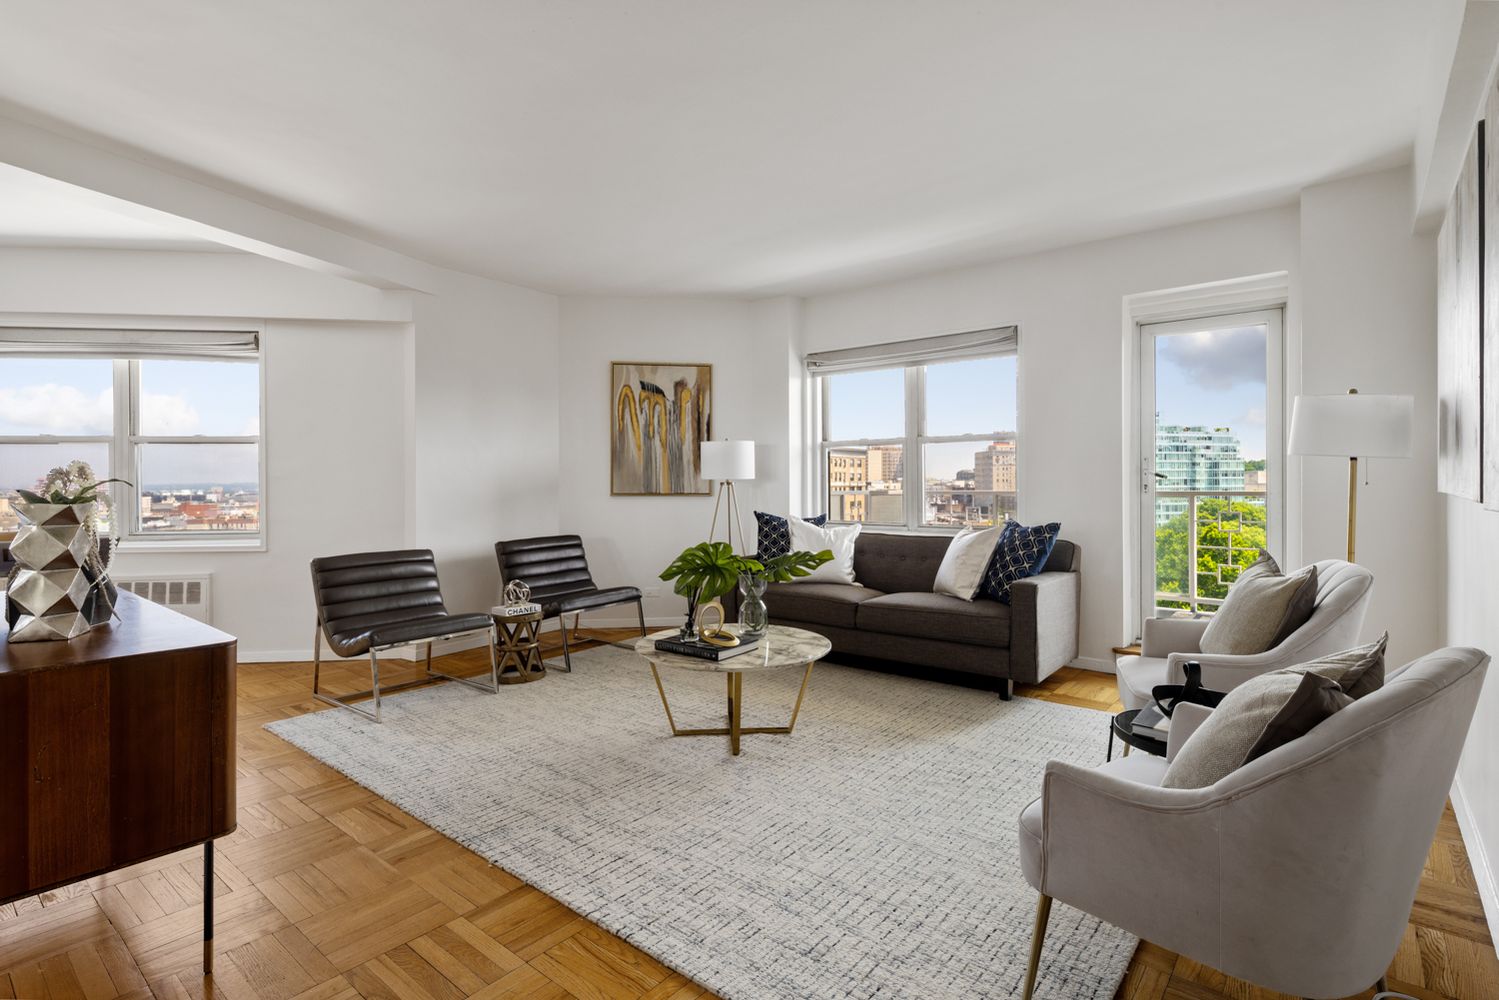 $1,450,000 | 10 Plaza Street East, Unit 14H | Prospect Heights